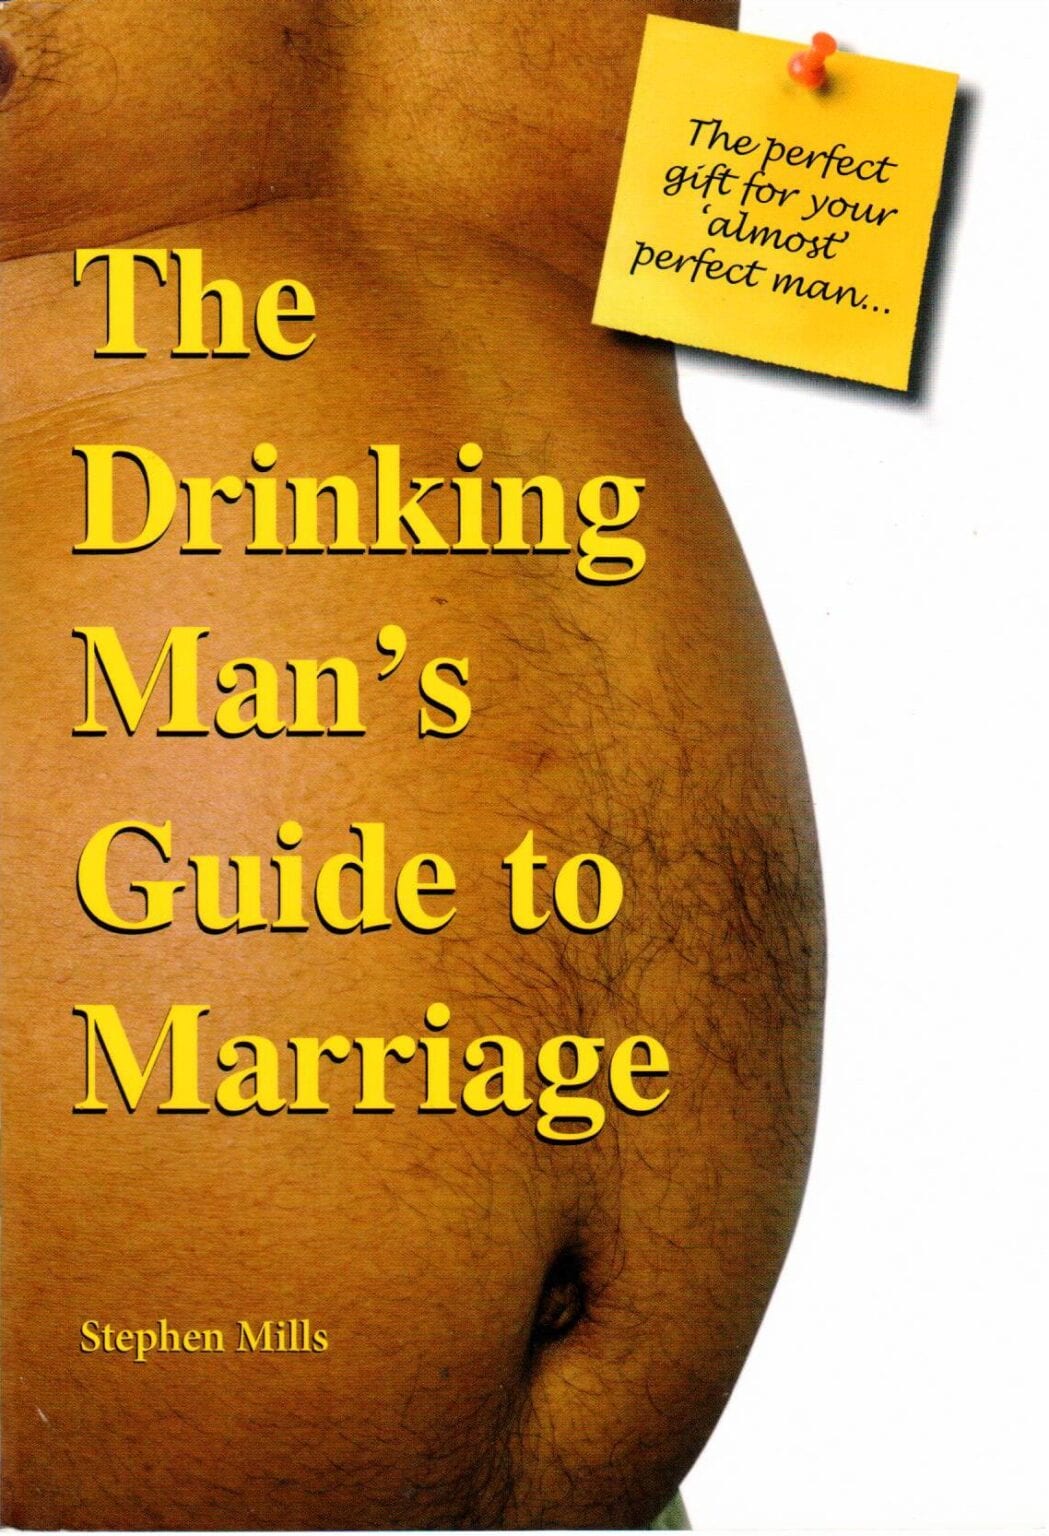 The Drinking Mans Guide to Marriage